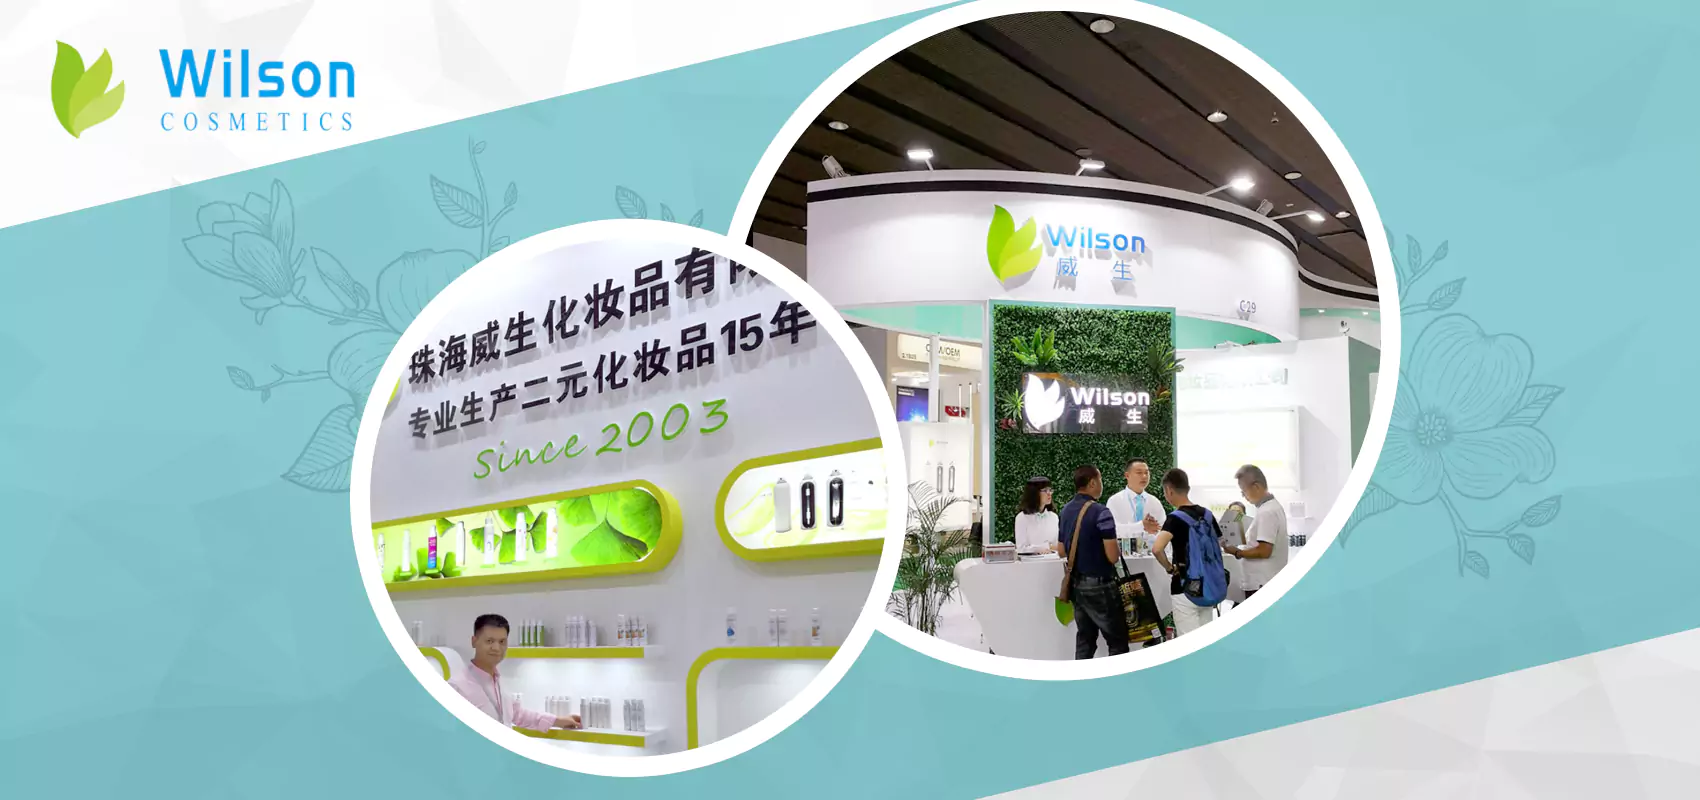 Shanghai PuDong Exhibition 2019